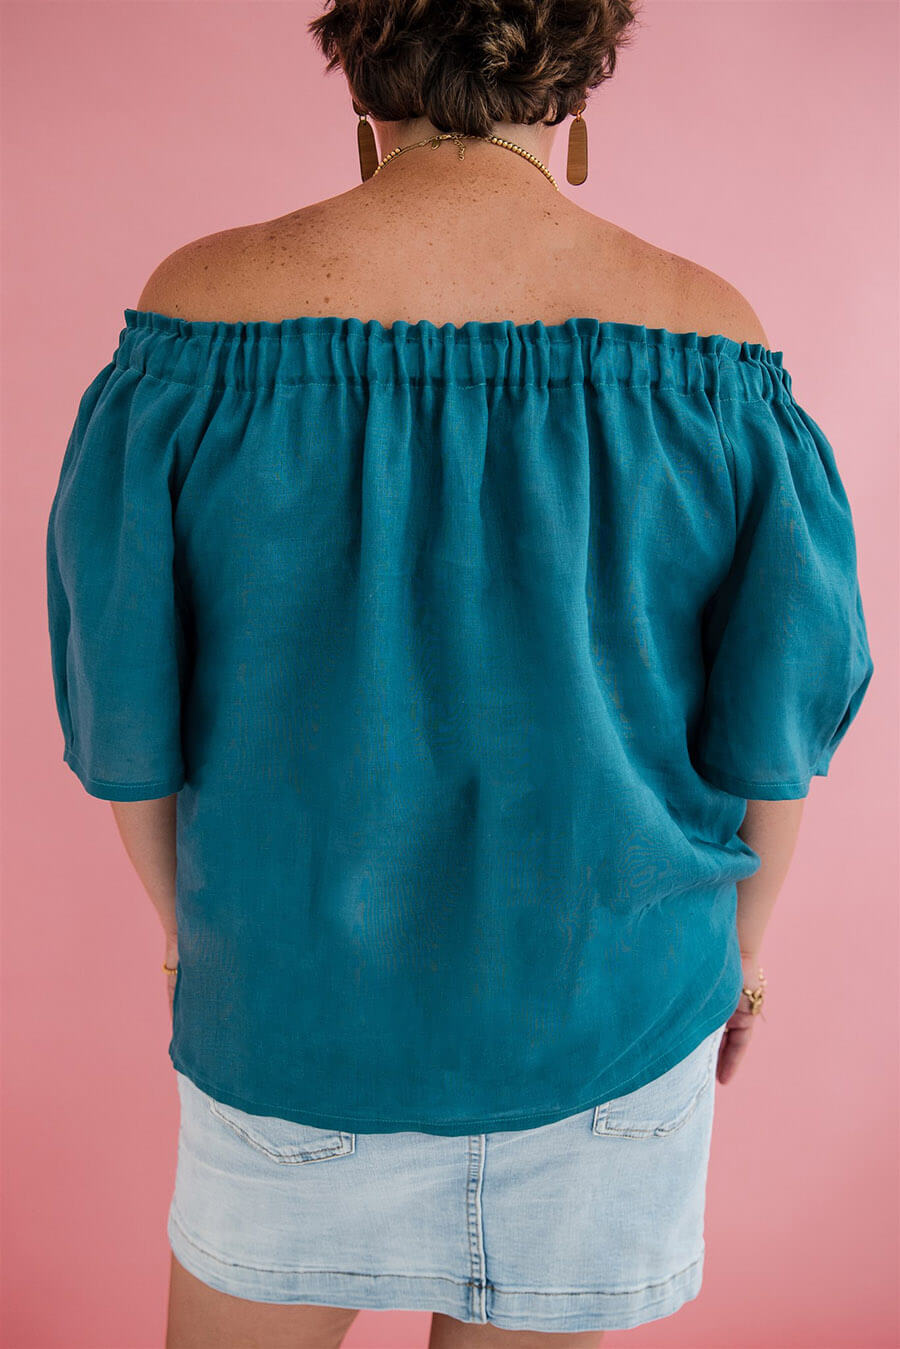 Adaptive Penny Top - Teal